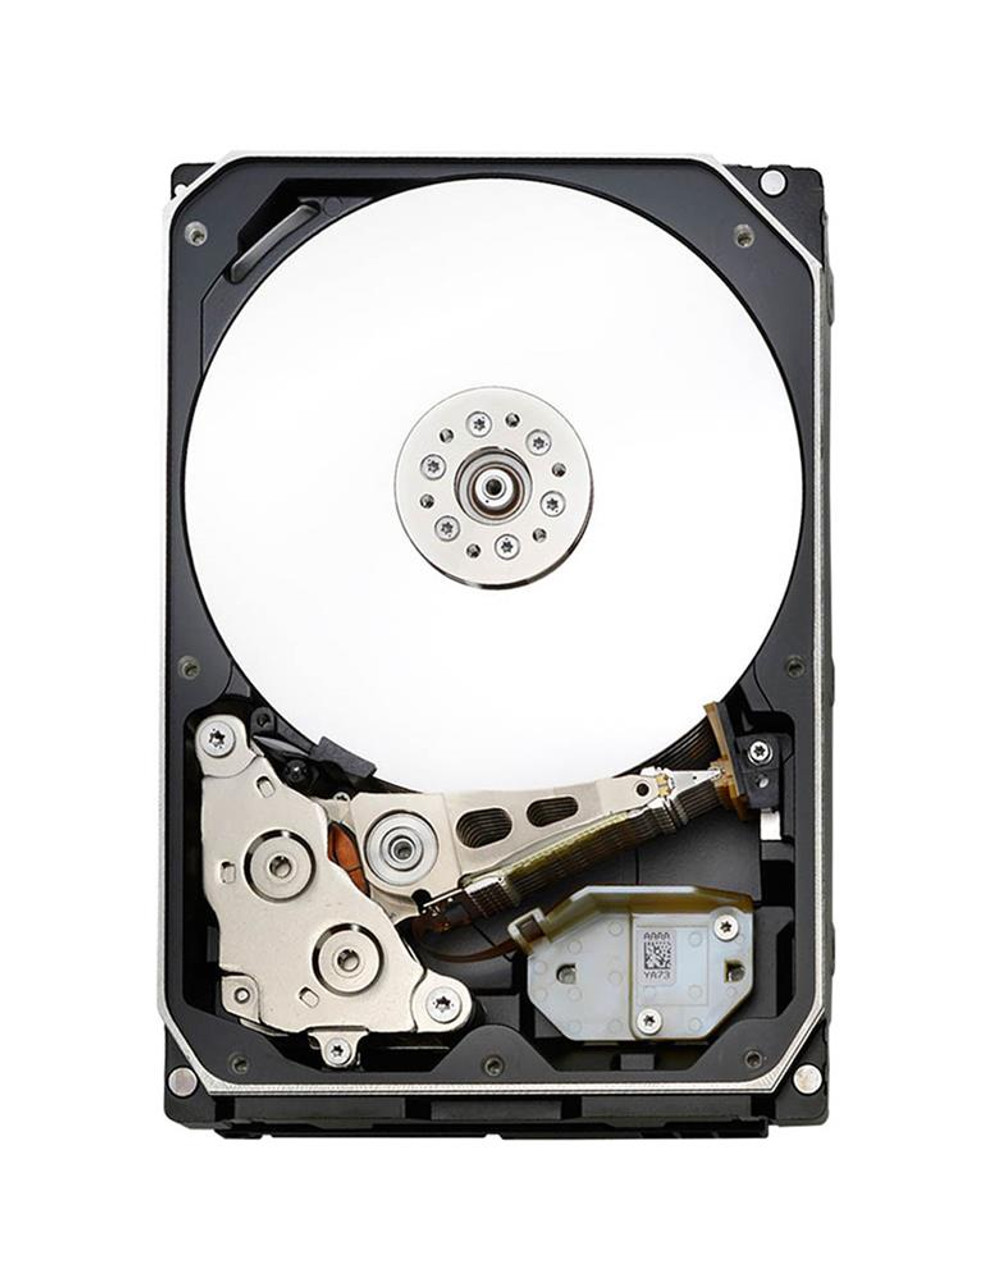 1EX0129 HGST Hitachi Ultrastar He8 8TB 7200RPM SATA 6Gbps 128MB Cache (ISE / 512e) 3.5-inch Internal Hard Drive with Carrier for Storage Enclosure 4U60